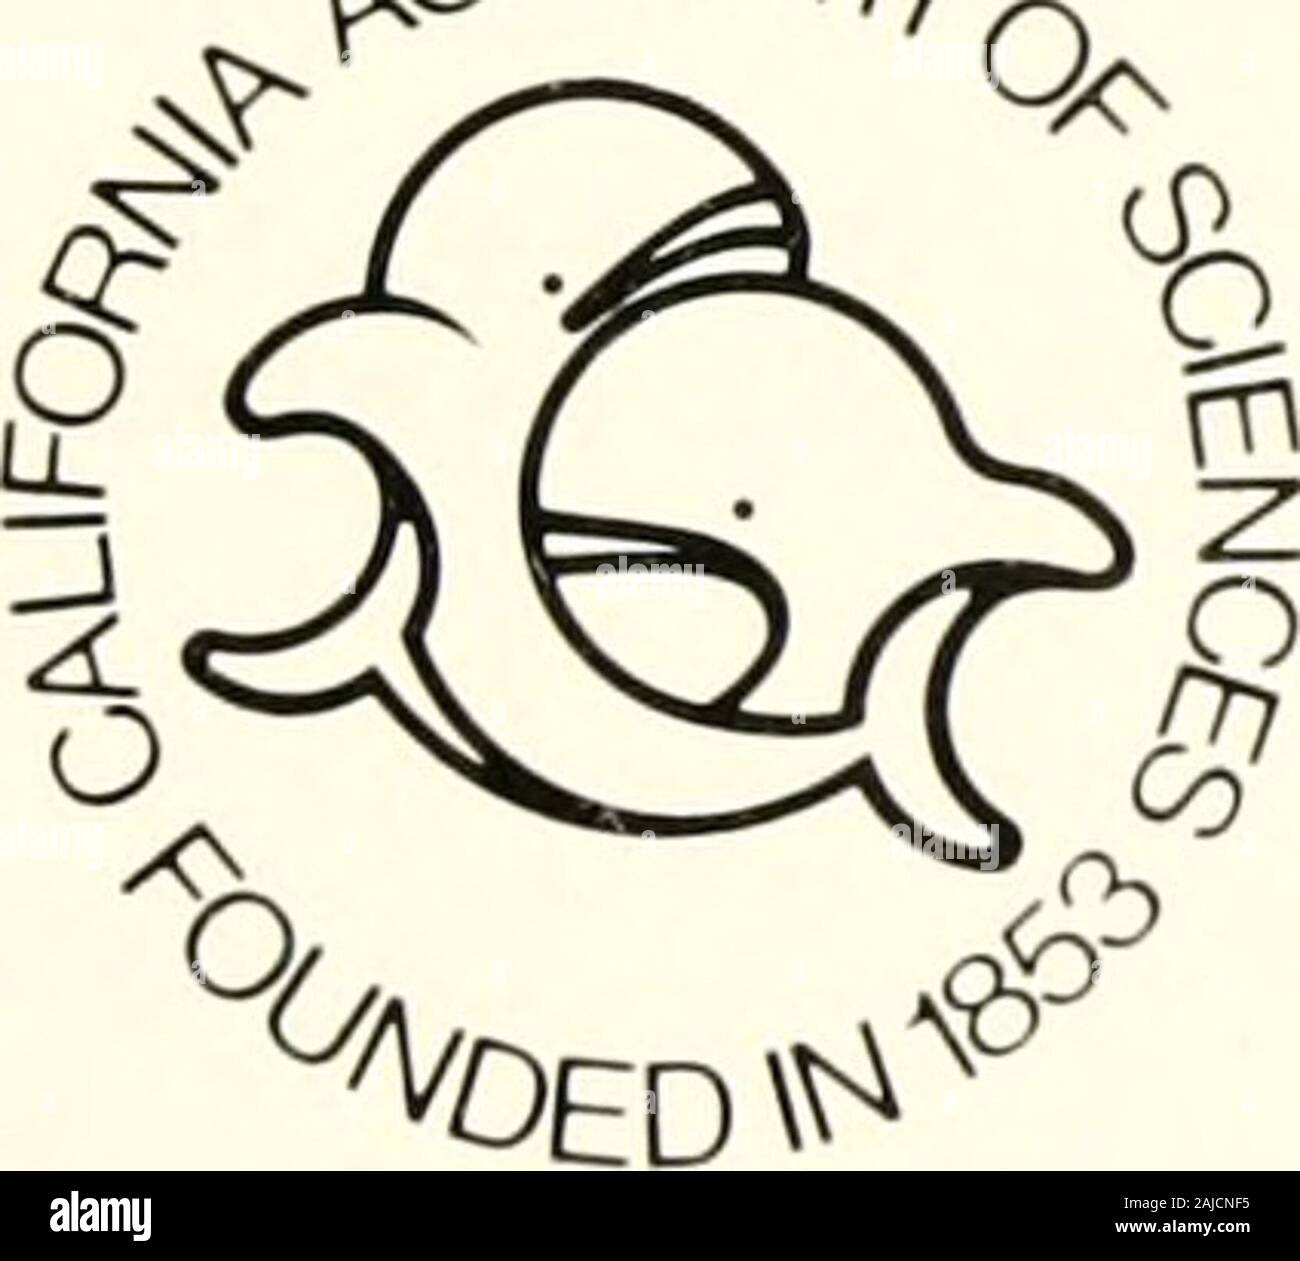 Occasional papers of the California Academy of Sciences . SAN FRANCISCO PUBLISHED BY THE ACADEMY o COMMITTEE ON PUBLICATIONS Laurence C. Binford. ChairmanTomio Iwamoto, Editor Paul H. Arnaud. Jr. William N. Eschmeyer George E. Lindsay The California Academy of Sciences Golden Gate Park San Francisco. California 94118 PRINTED IN THE UNITED STATES OF AMERICABY ALLEN PRESS INC.. LAWRENCE, KANSAS Table of Contents Abstract v Introduction 1 Methods 2 Literature on Nerves of Perciform Fishes 3 Family Nandidae 3 Names of Cranial Nerves 4 Nerve Components 4 Descriptions of Nerves 5 Radix Profundus 5 F Stock Photo